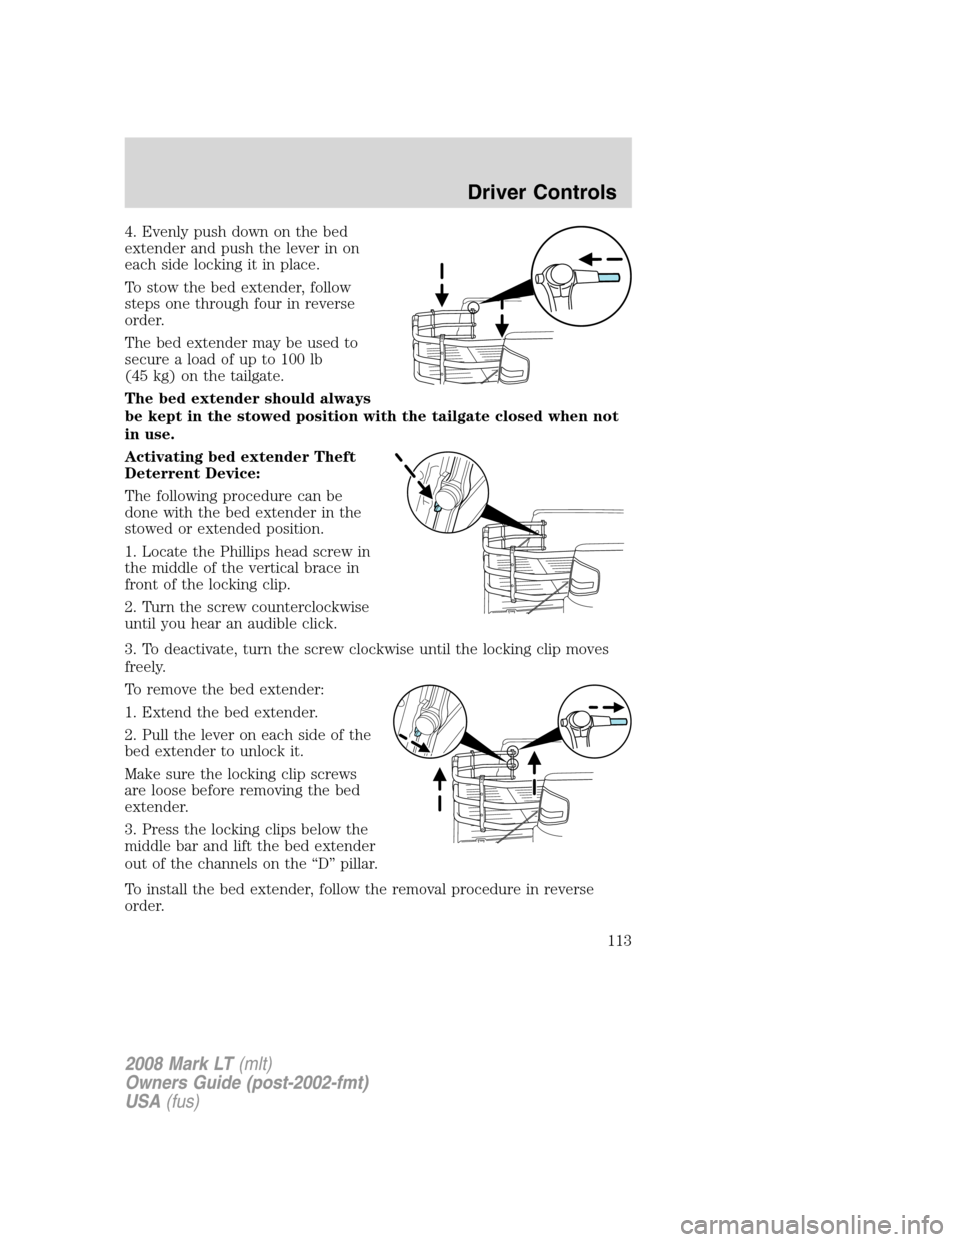 LINCOLN MARK LT 2008  Owners Manual 4. Evenly push down on the bed
extender and push the lever in on
each side locking it in place.
To stow the bed extender, follow
steps one through four in reverse
order.
The bed extender may be used t